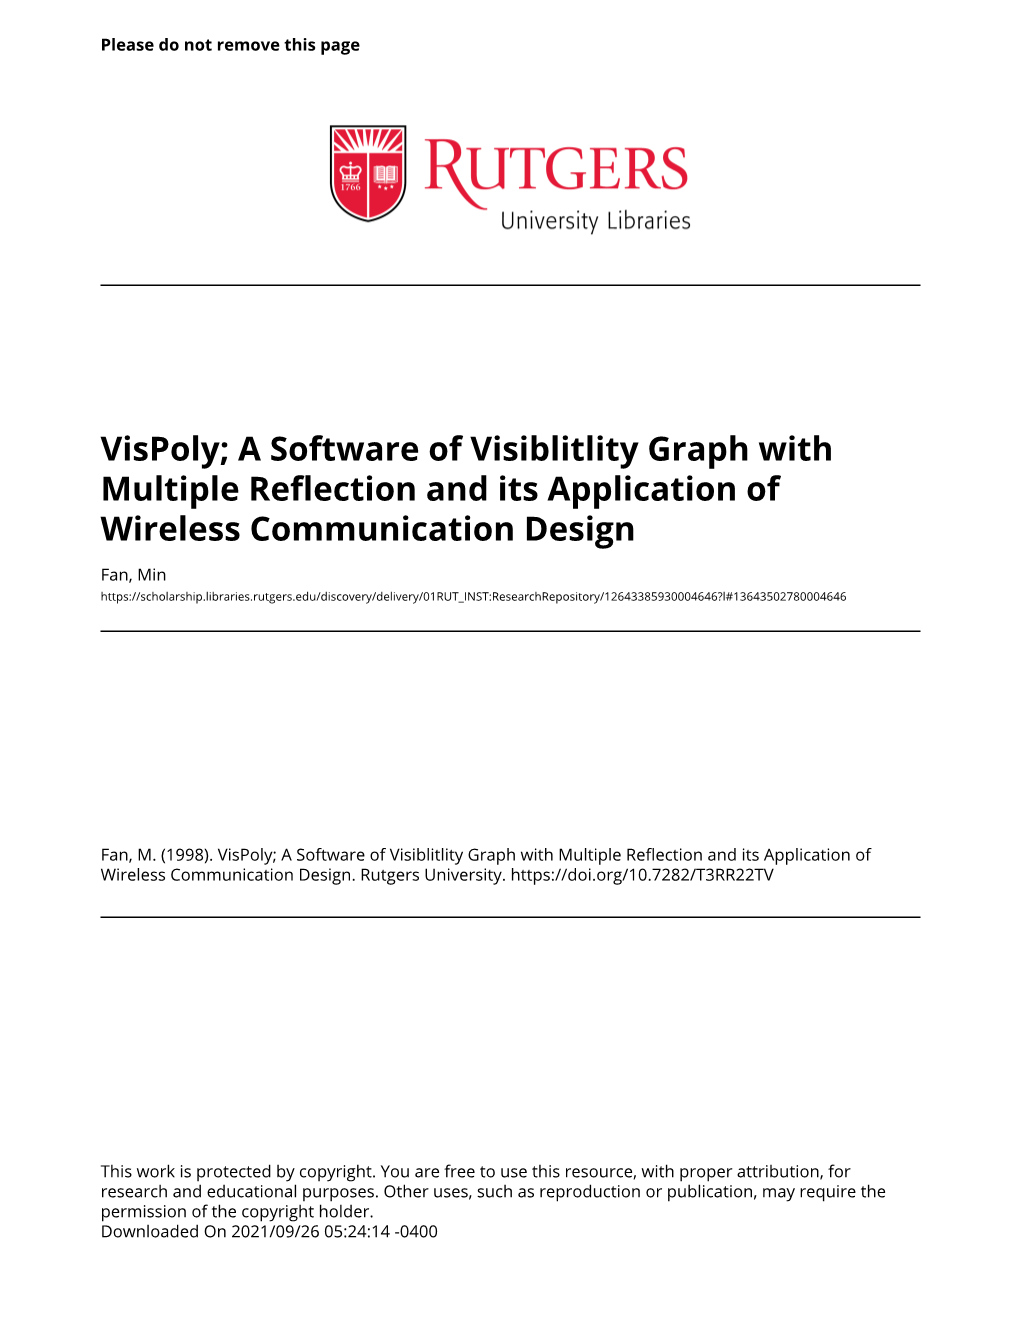 A Software of Visiblitlity Graph with Multiple Reflection and Its Application of Wireless Communication Design